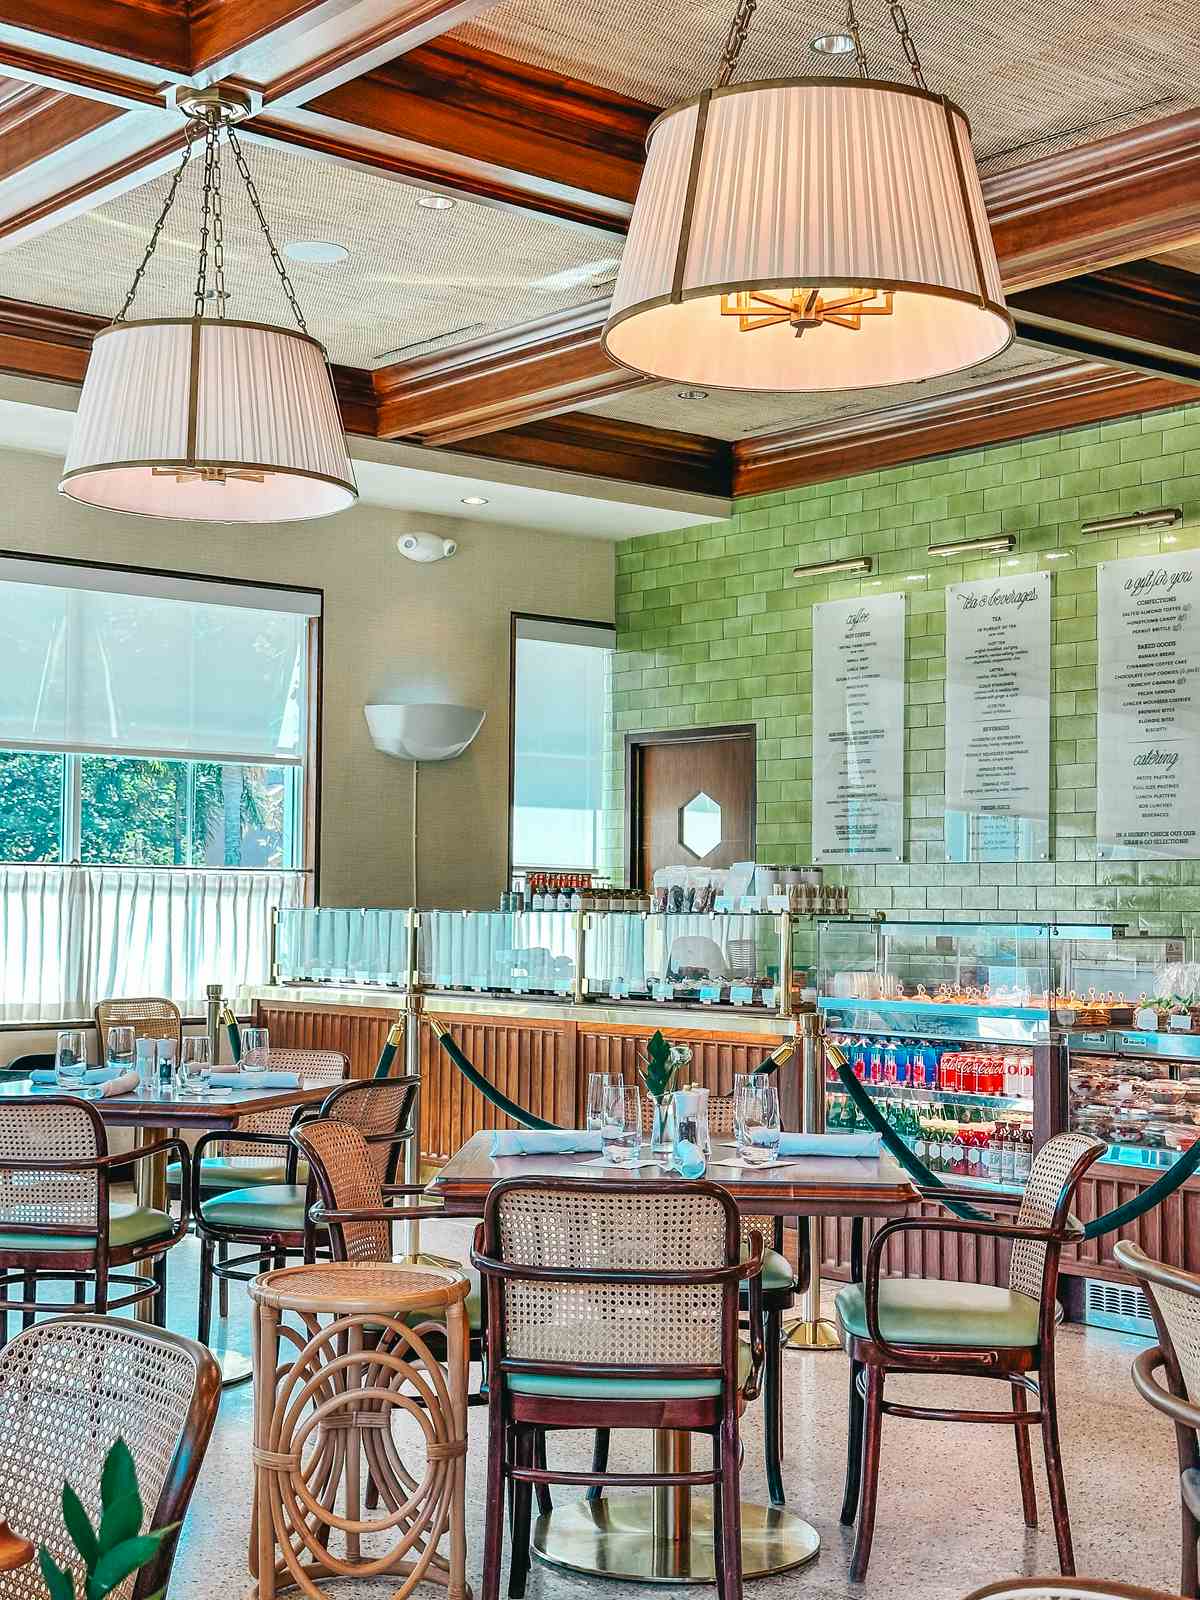 Interior of The Hive Bakery and Cafe in West Palm Beach